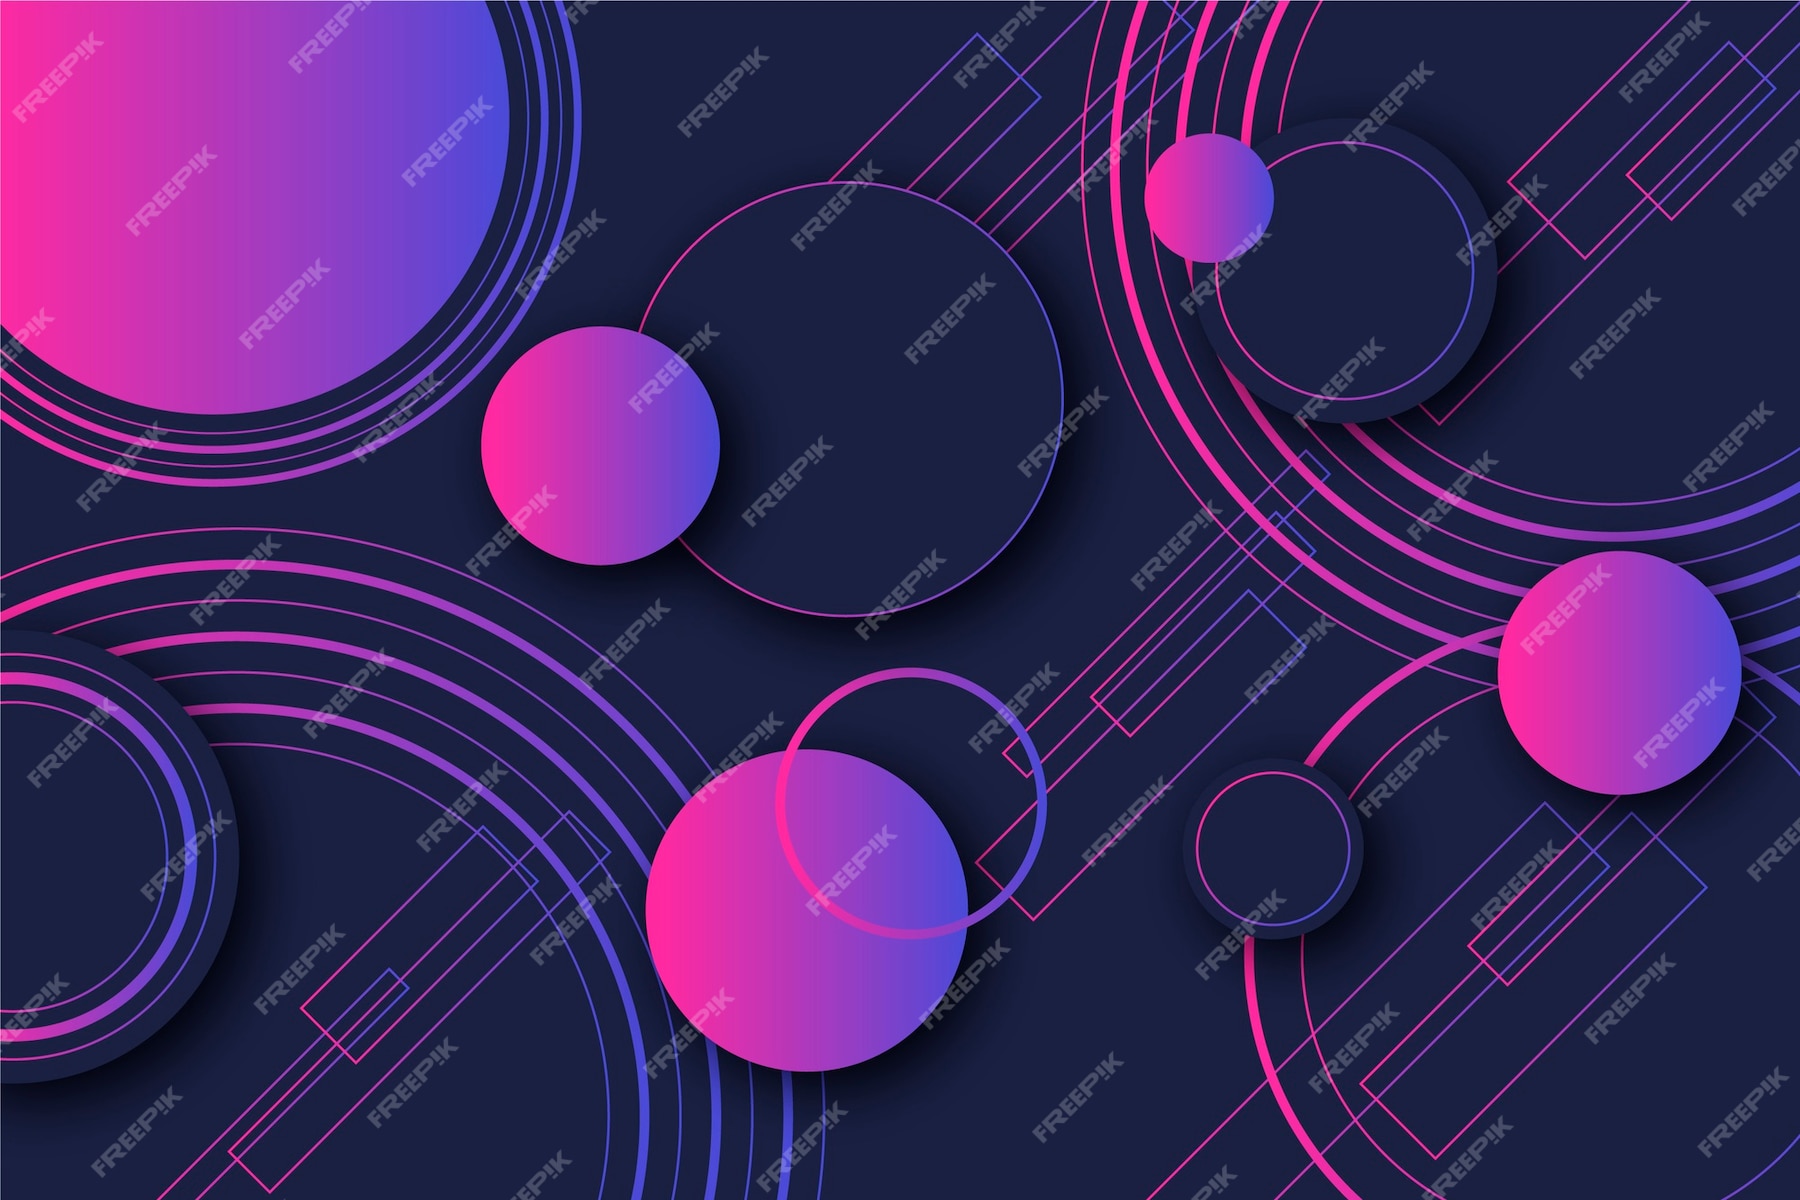 Premium Vector | Gradient violet dots and circles geometric shapes on ...